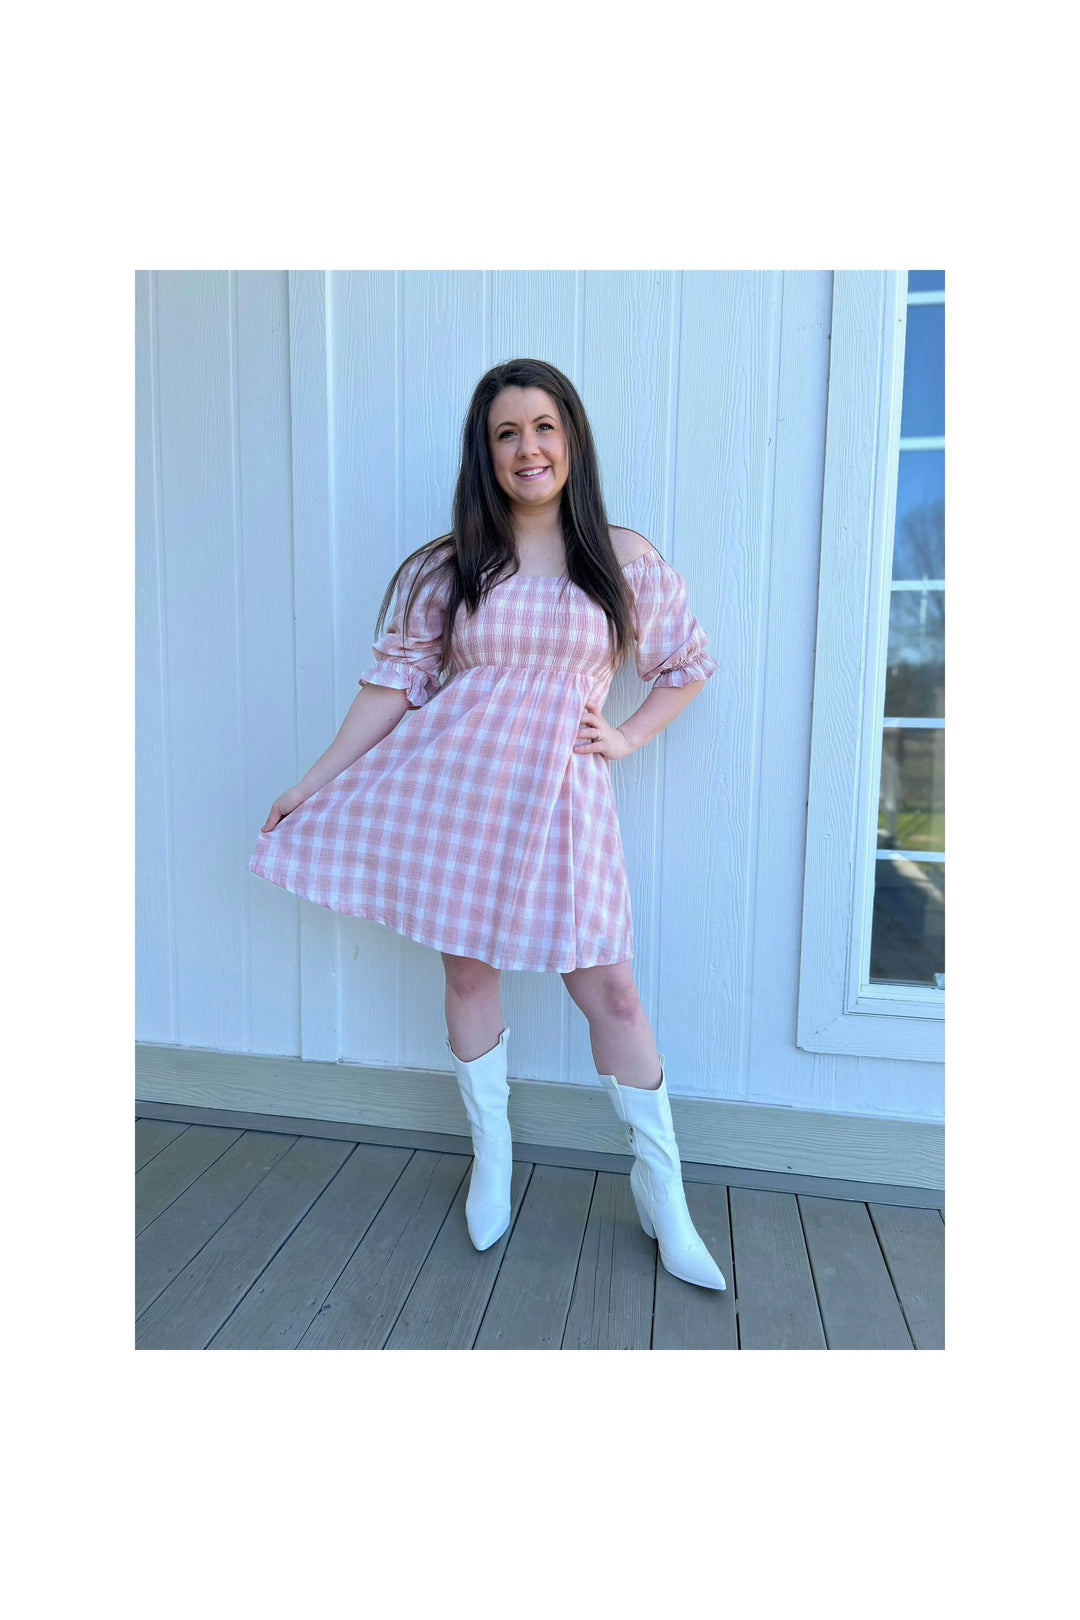 Blush Pink Plaid Dress-Dresses-Kori America-Vintage Dragonfly-Women’s Fashion Boutique Located in Sumrall, Mississippi